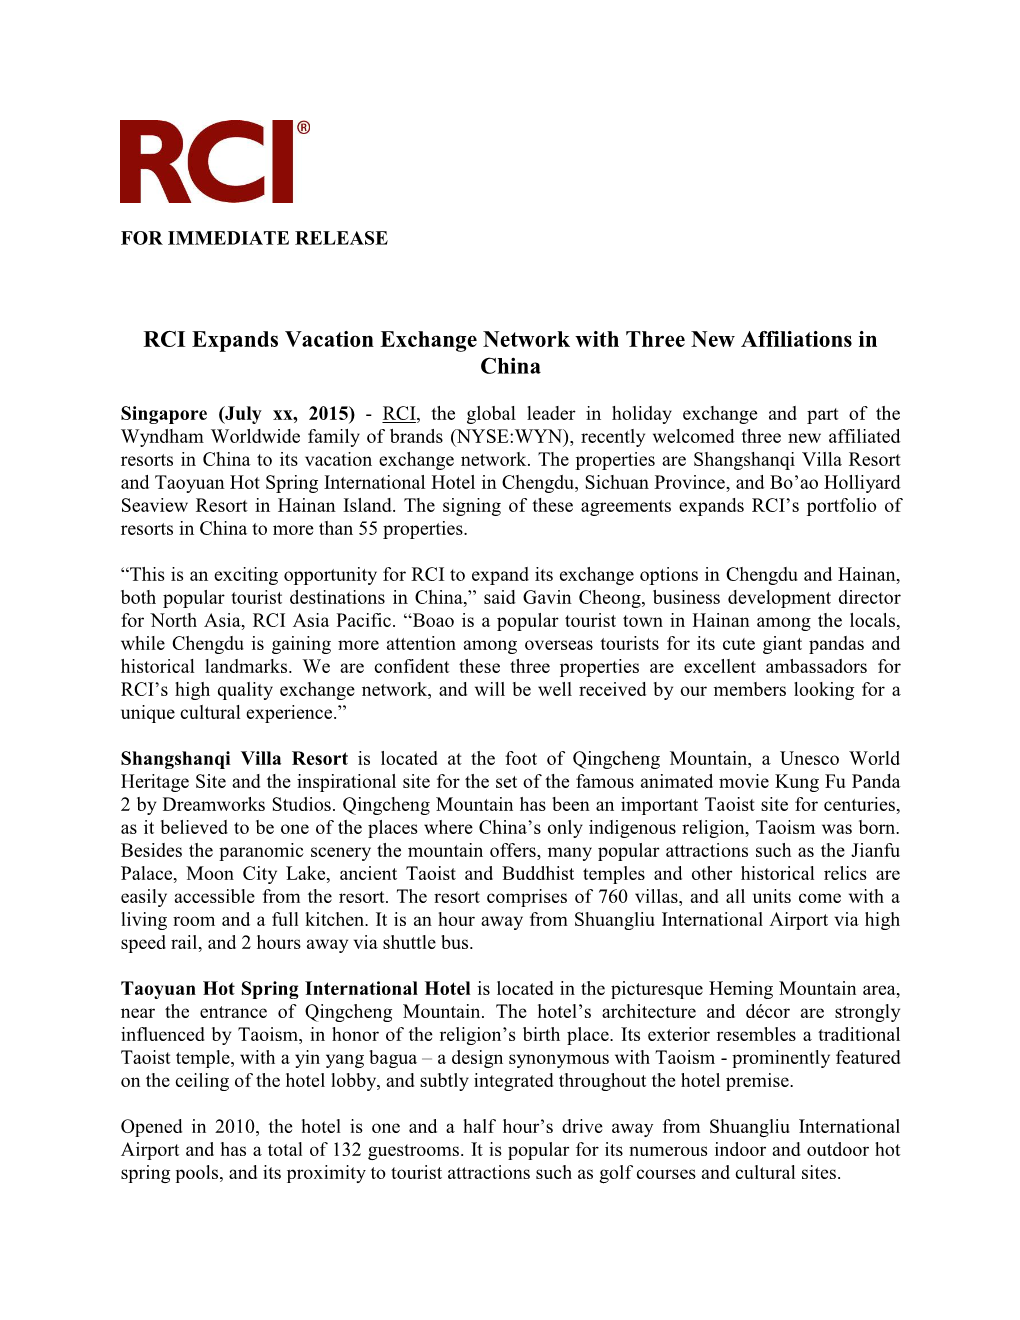 RCI Expands Vacation Exchange Network with Three New Affiliations in China